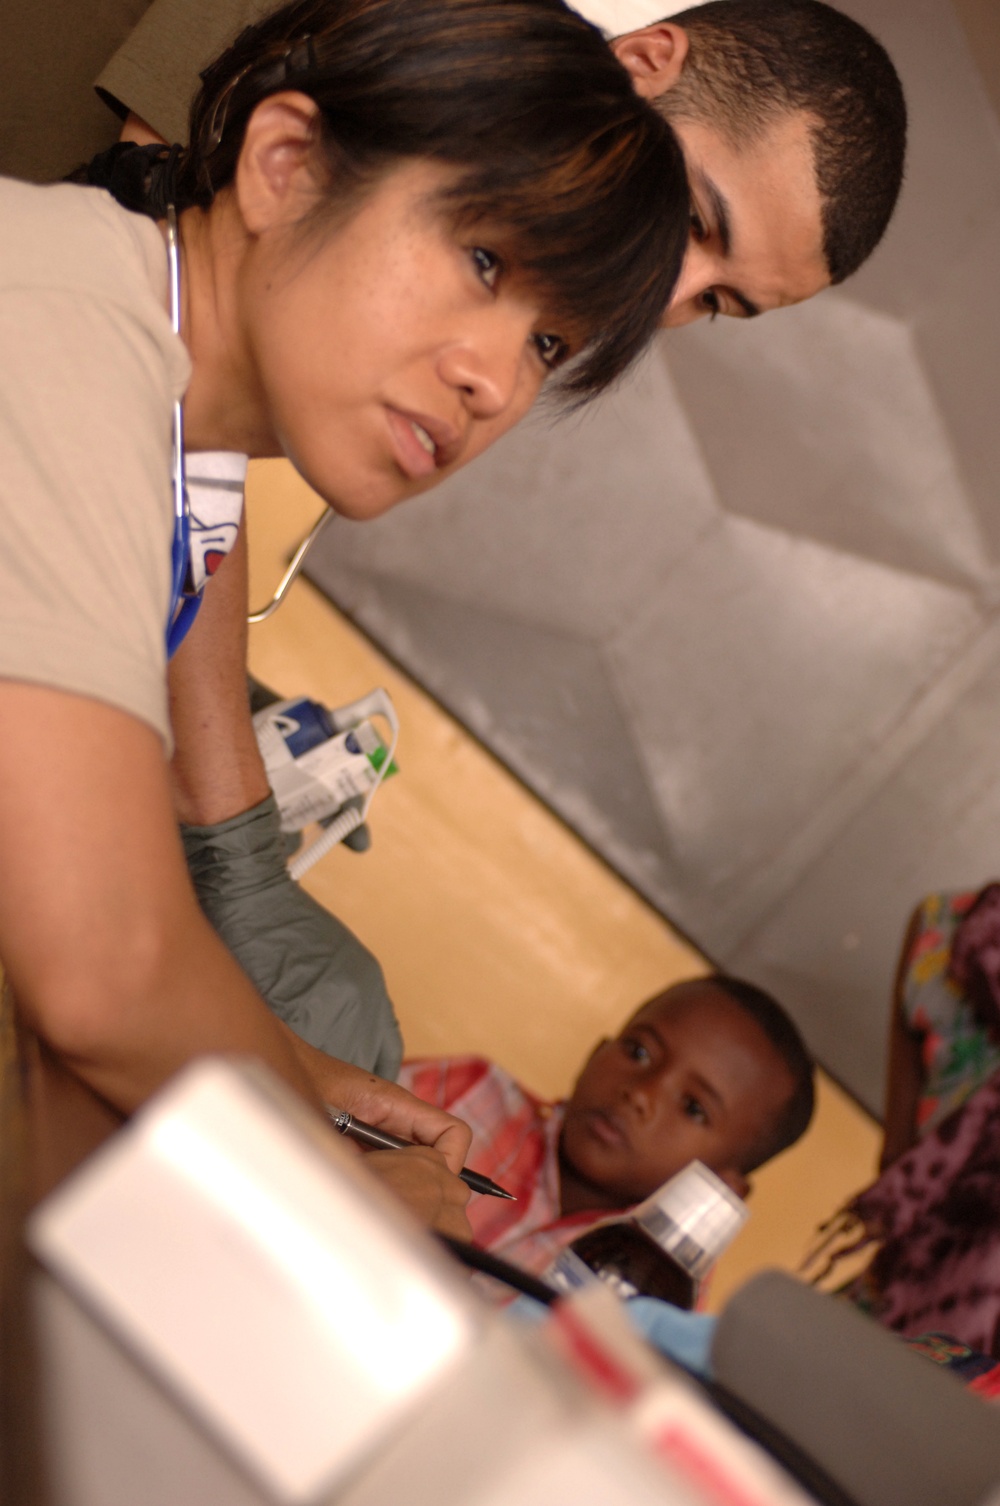 U.S. and Djibouti Healthcare Workers Deliver Care